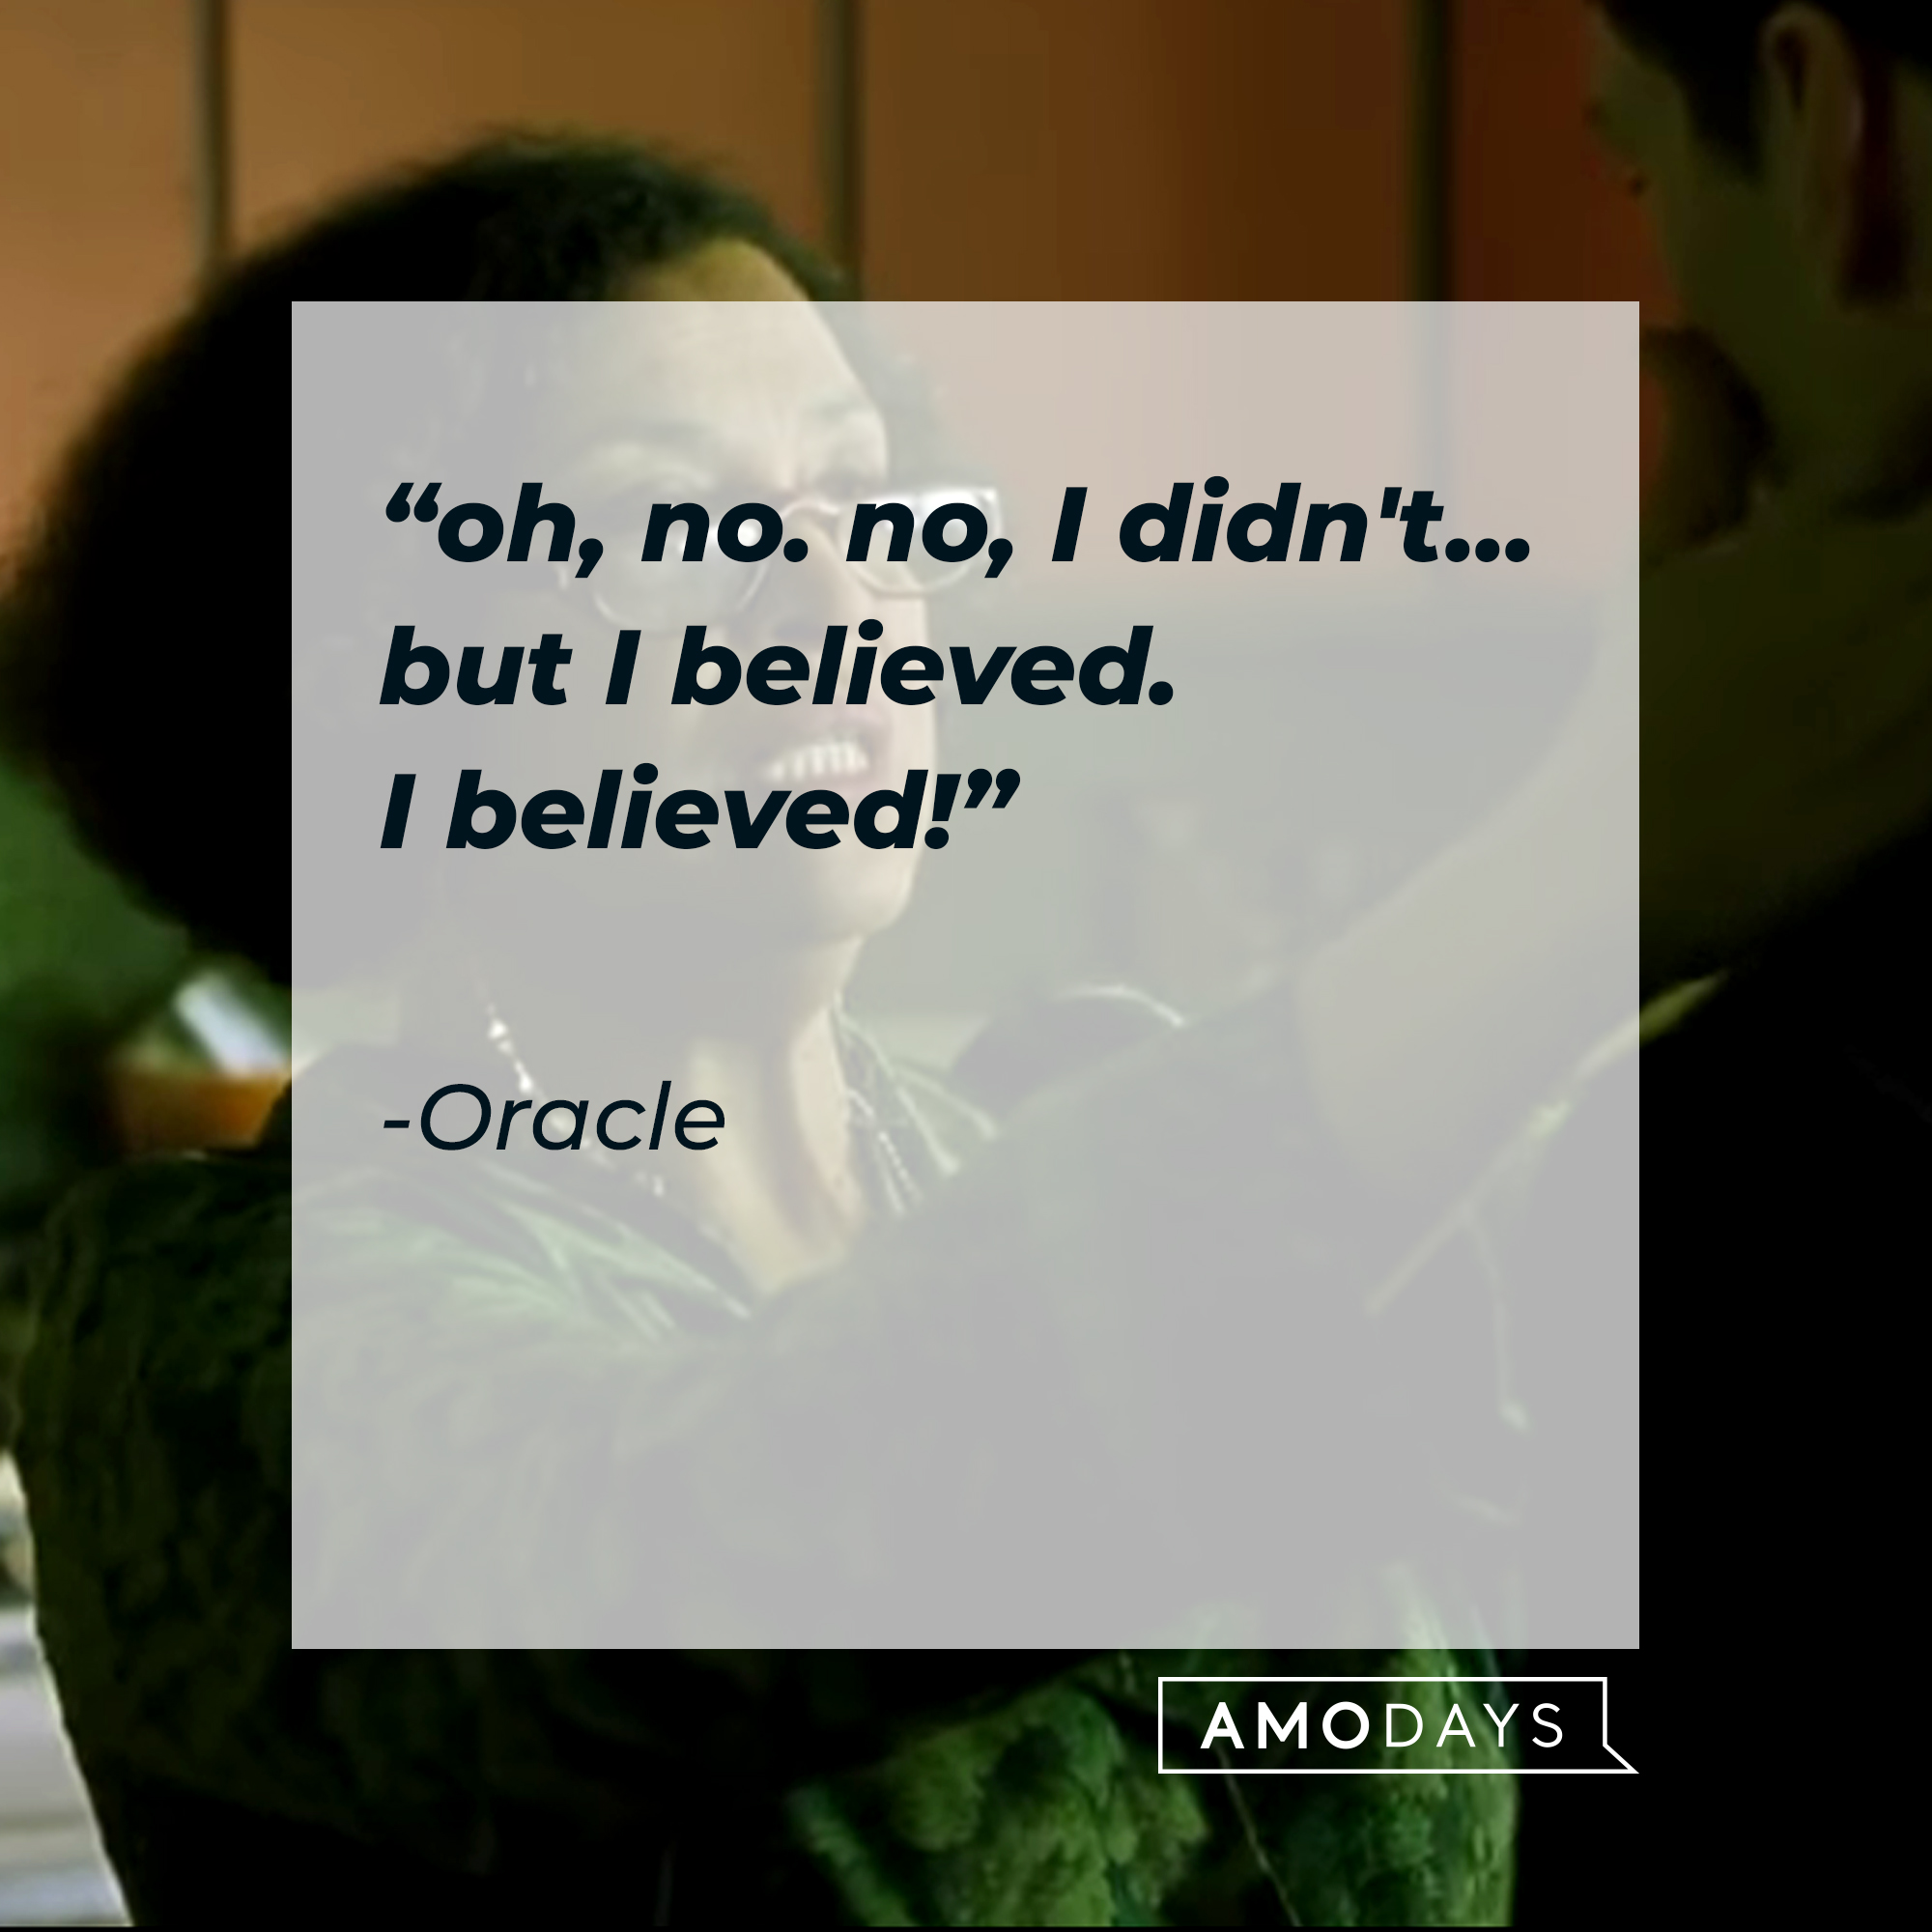 Oracle's quote: "Oh, no. no, I didn't... but I believed. I believed!" | Source: facebook.com/TheMatrixMovie